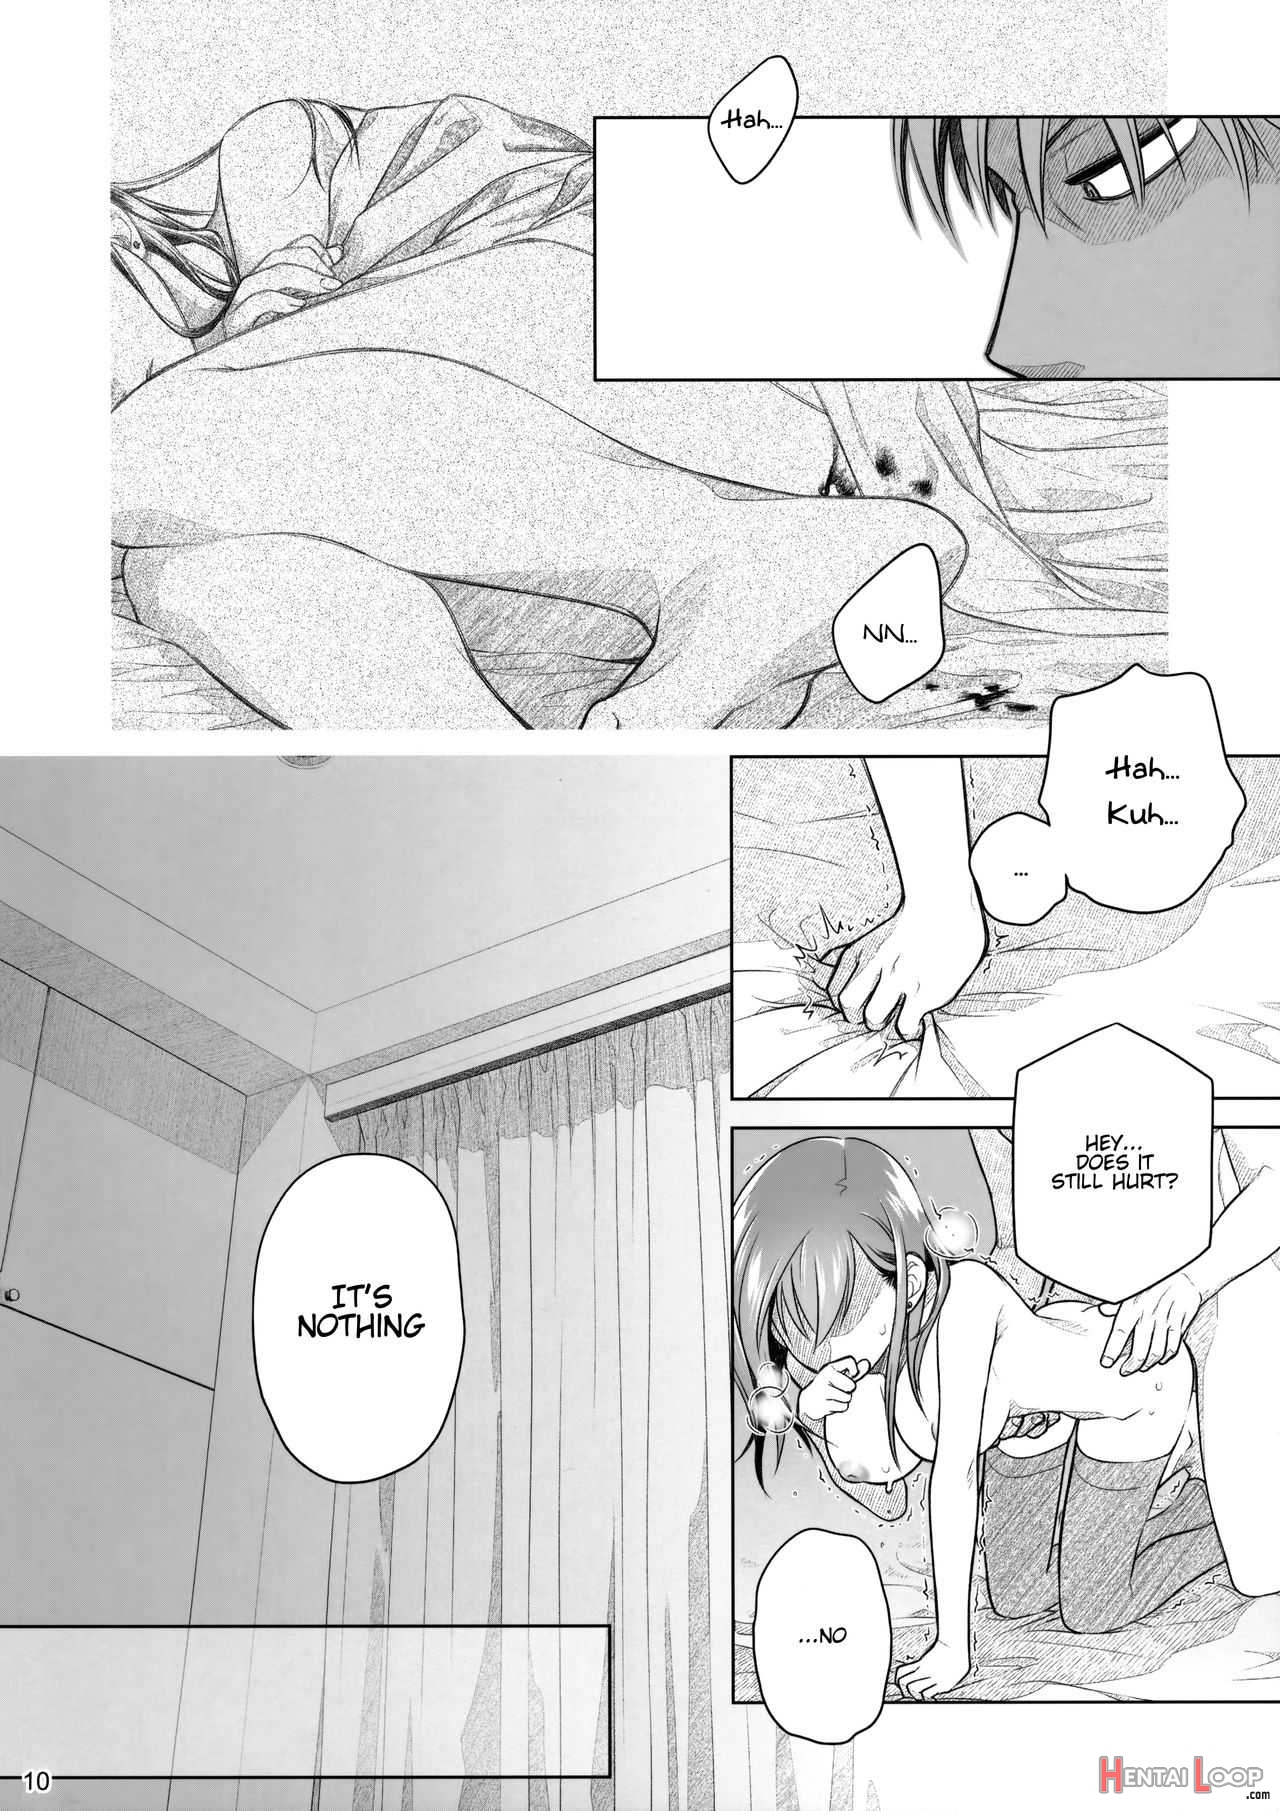 Stay By Me Zenjitsutan Fragile S - Stay By Me "prequel" page 9